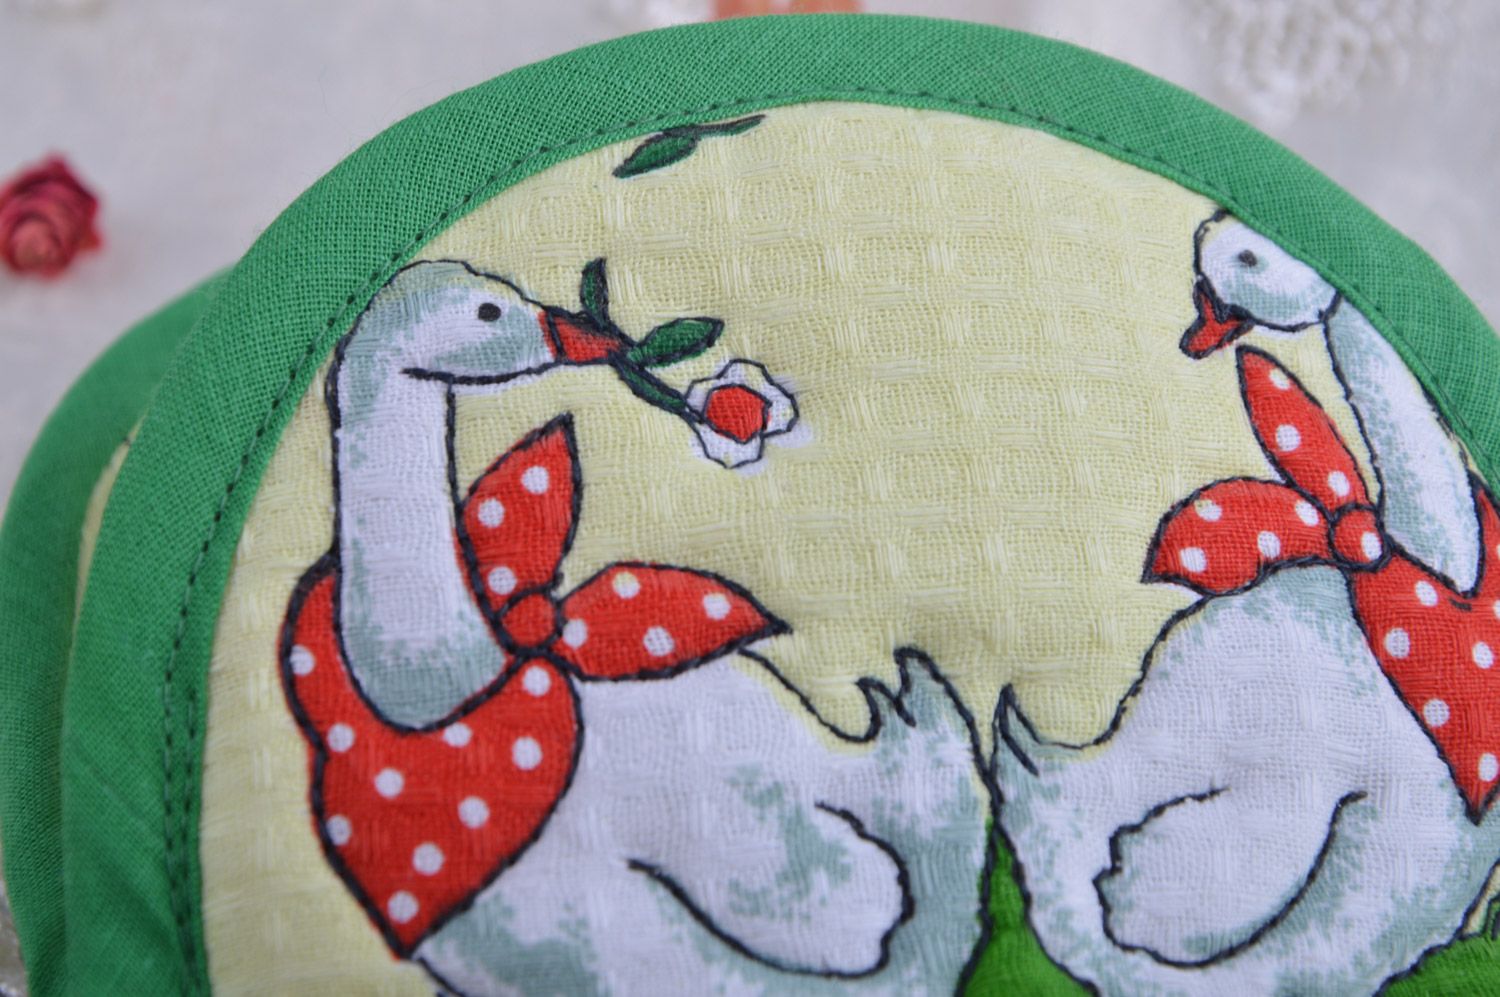 Cute handmade oven mitten sewn of colorful cotton fabric with geese image   photo 4